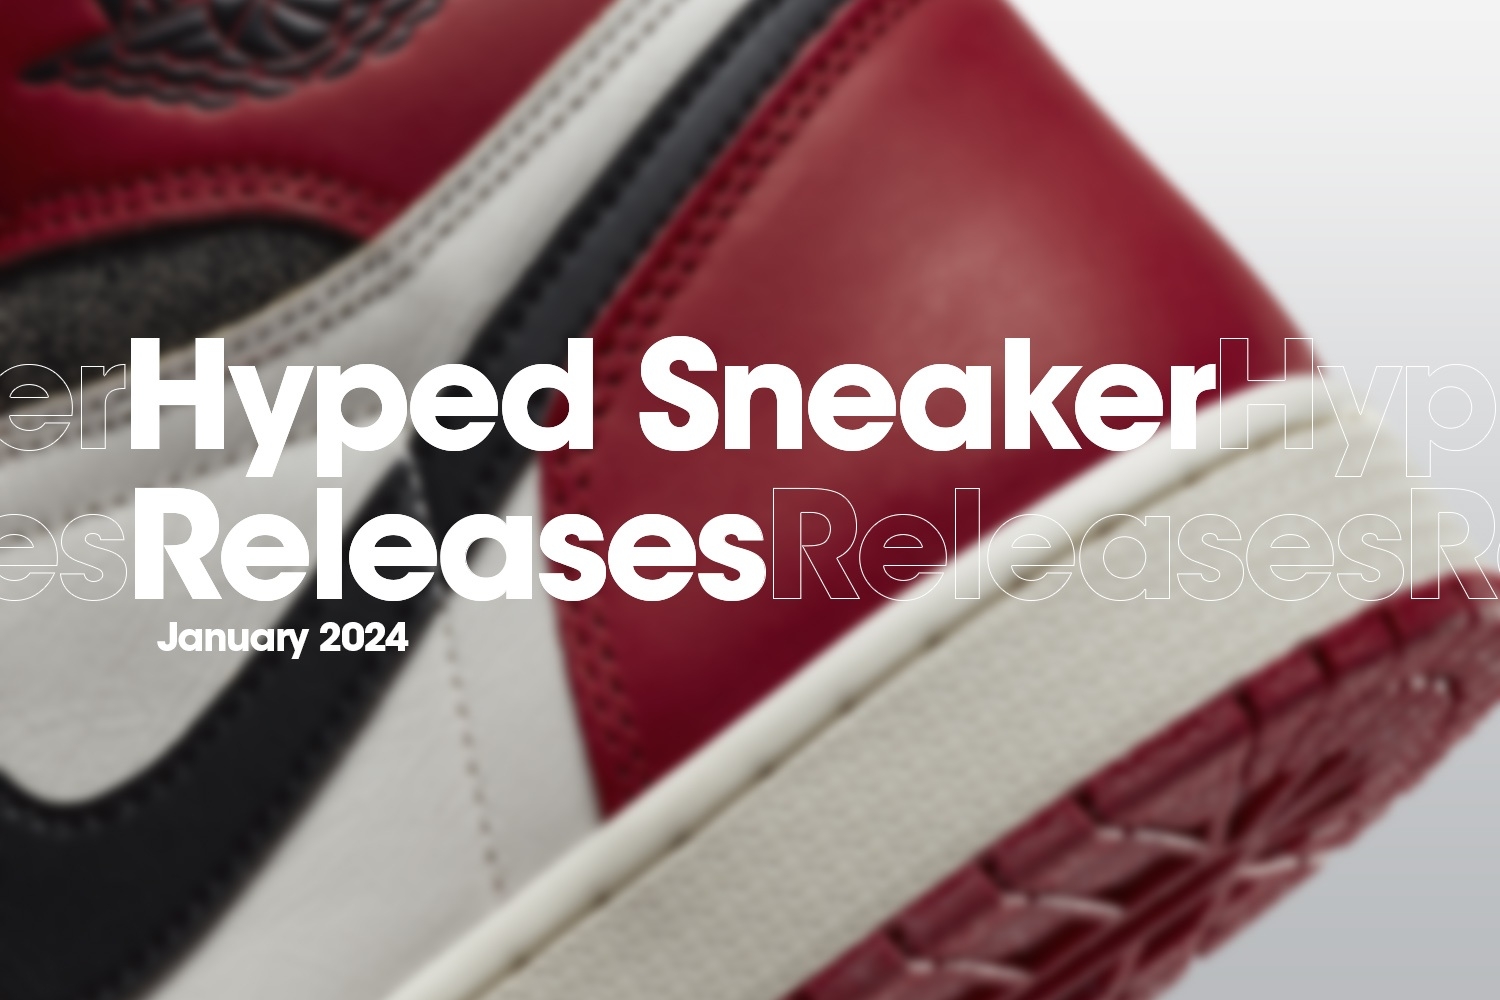 Hyped Sneaker Releases of January 2024